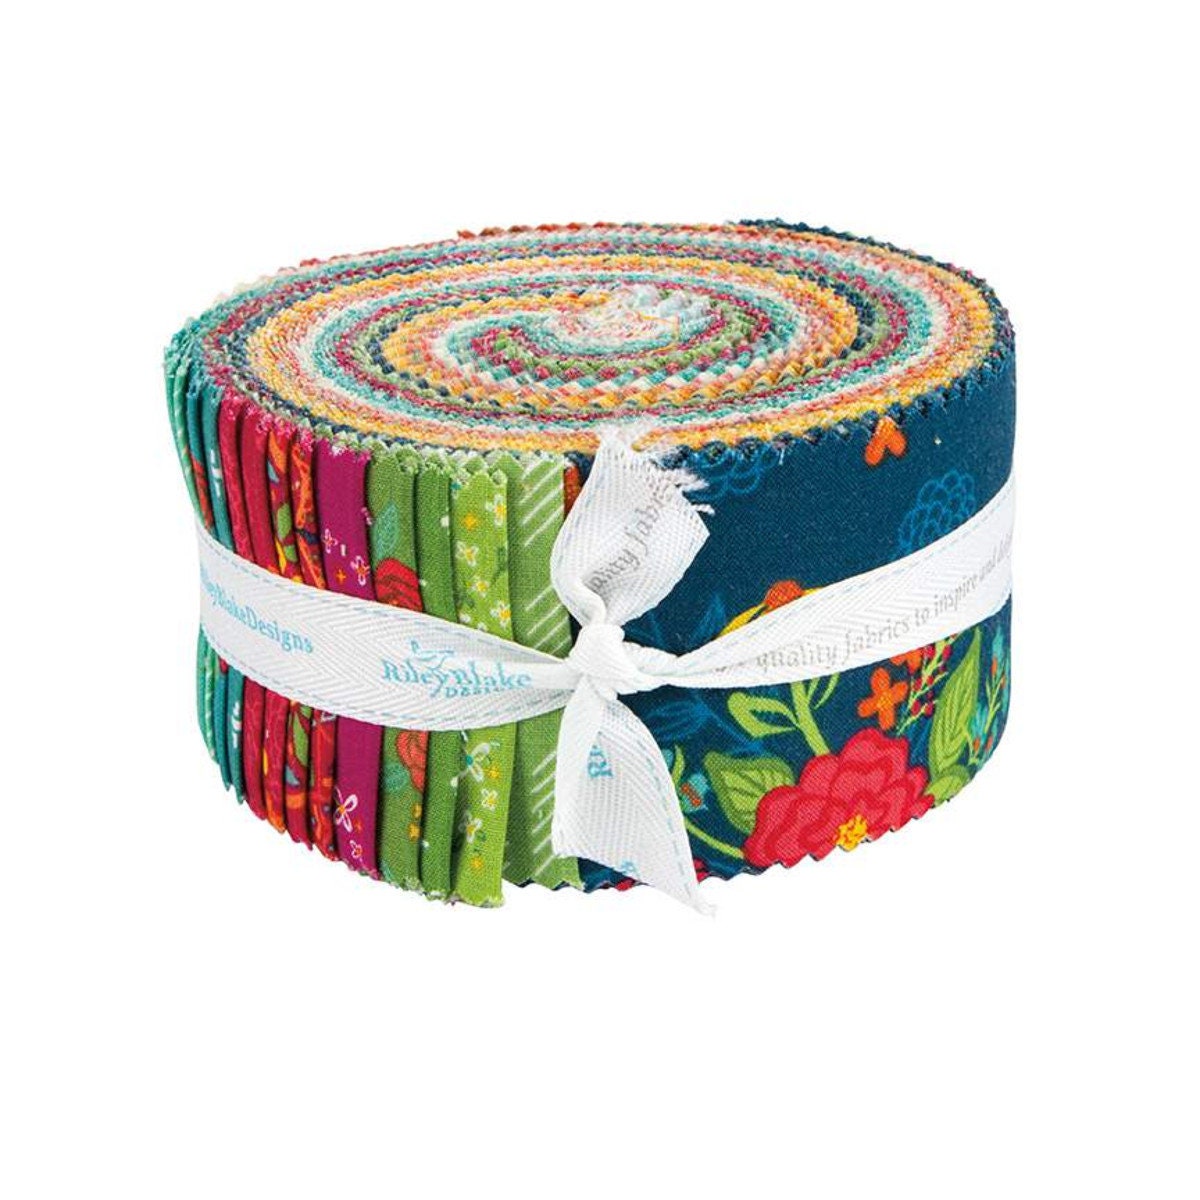 Jelly Rolls for Quilting, Jelly Roll Fabric Strips for Quilting, Pre-Cut  Jelly Roll Fabric in Vivid Colors, Jelly Rolls for Quilting Clearance,  Fabric